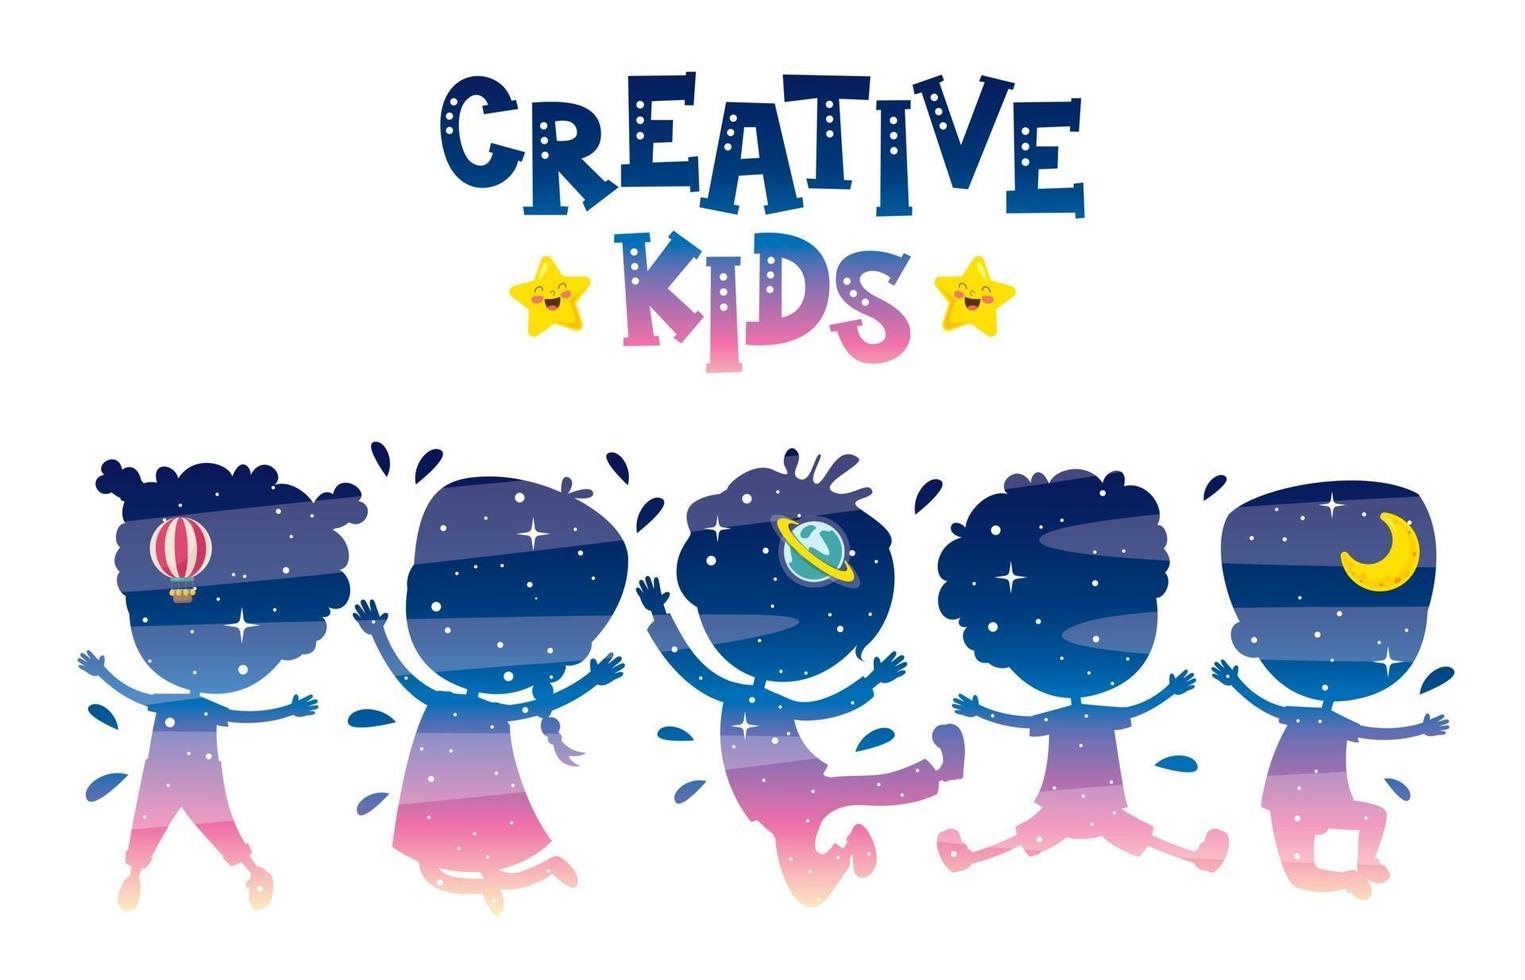 Concept Design With Kids Silhouette vector